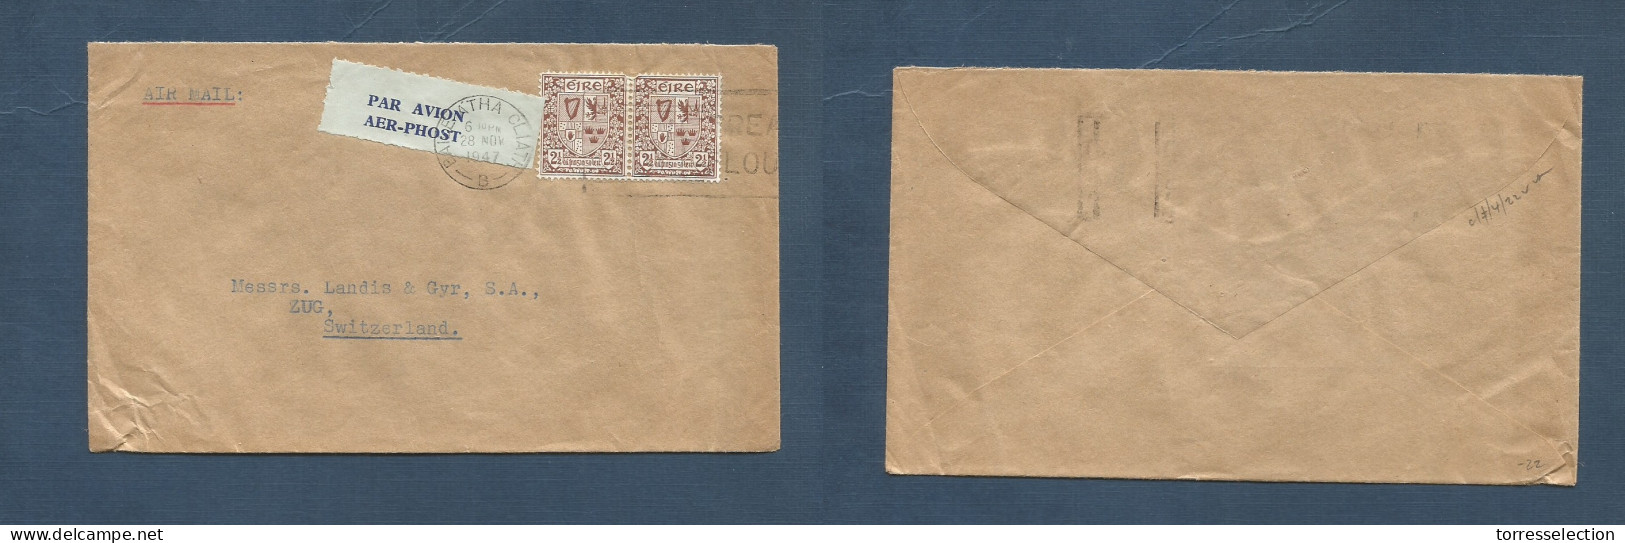 EIRE. 1947 (28 Nov) Bale Atha Claith - Switzerland, Zug. Air Multlifkd Env Tied Air Label + 5d Rate. XSALE. - Used Stamps